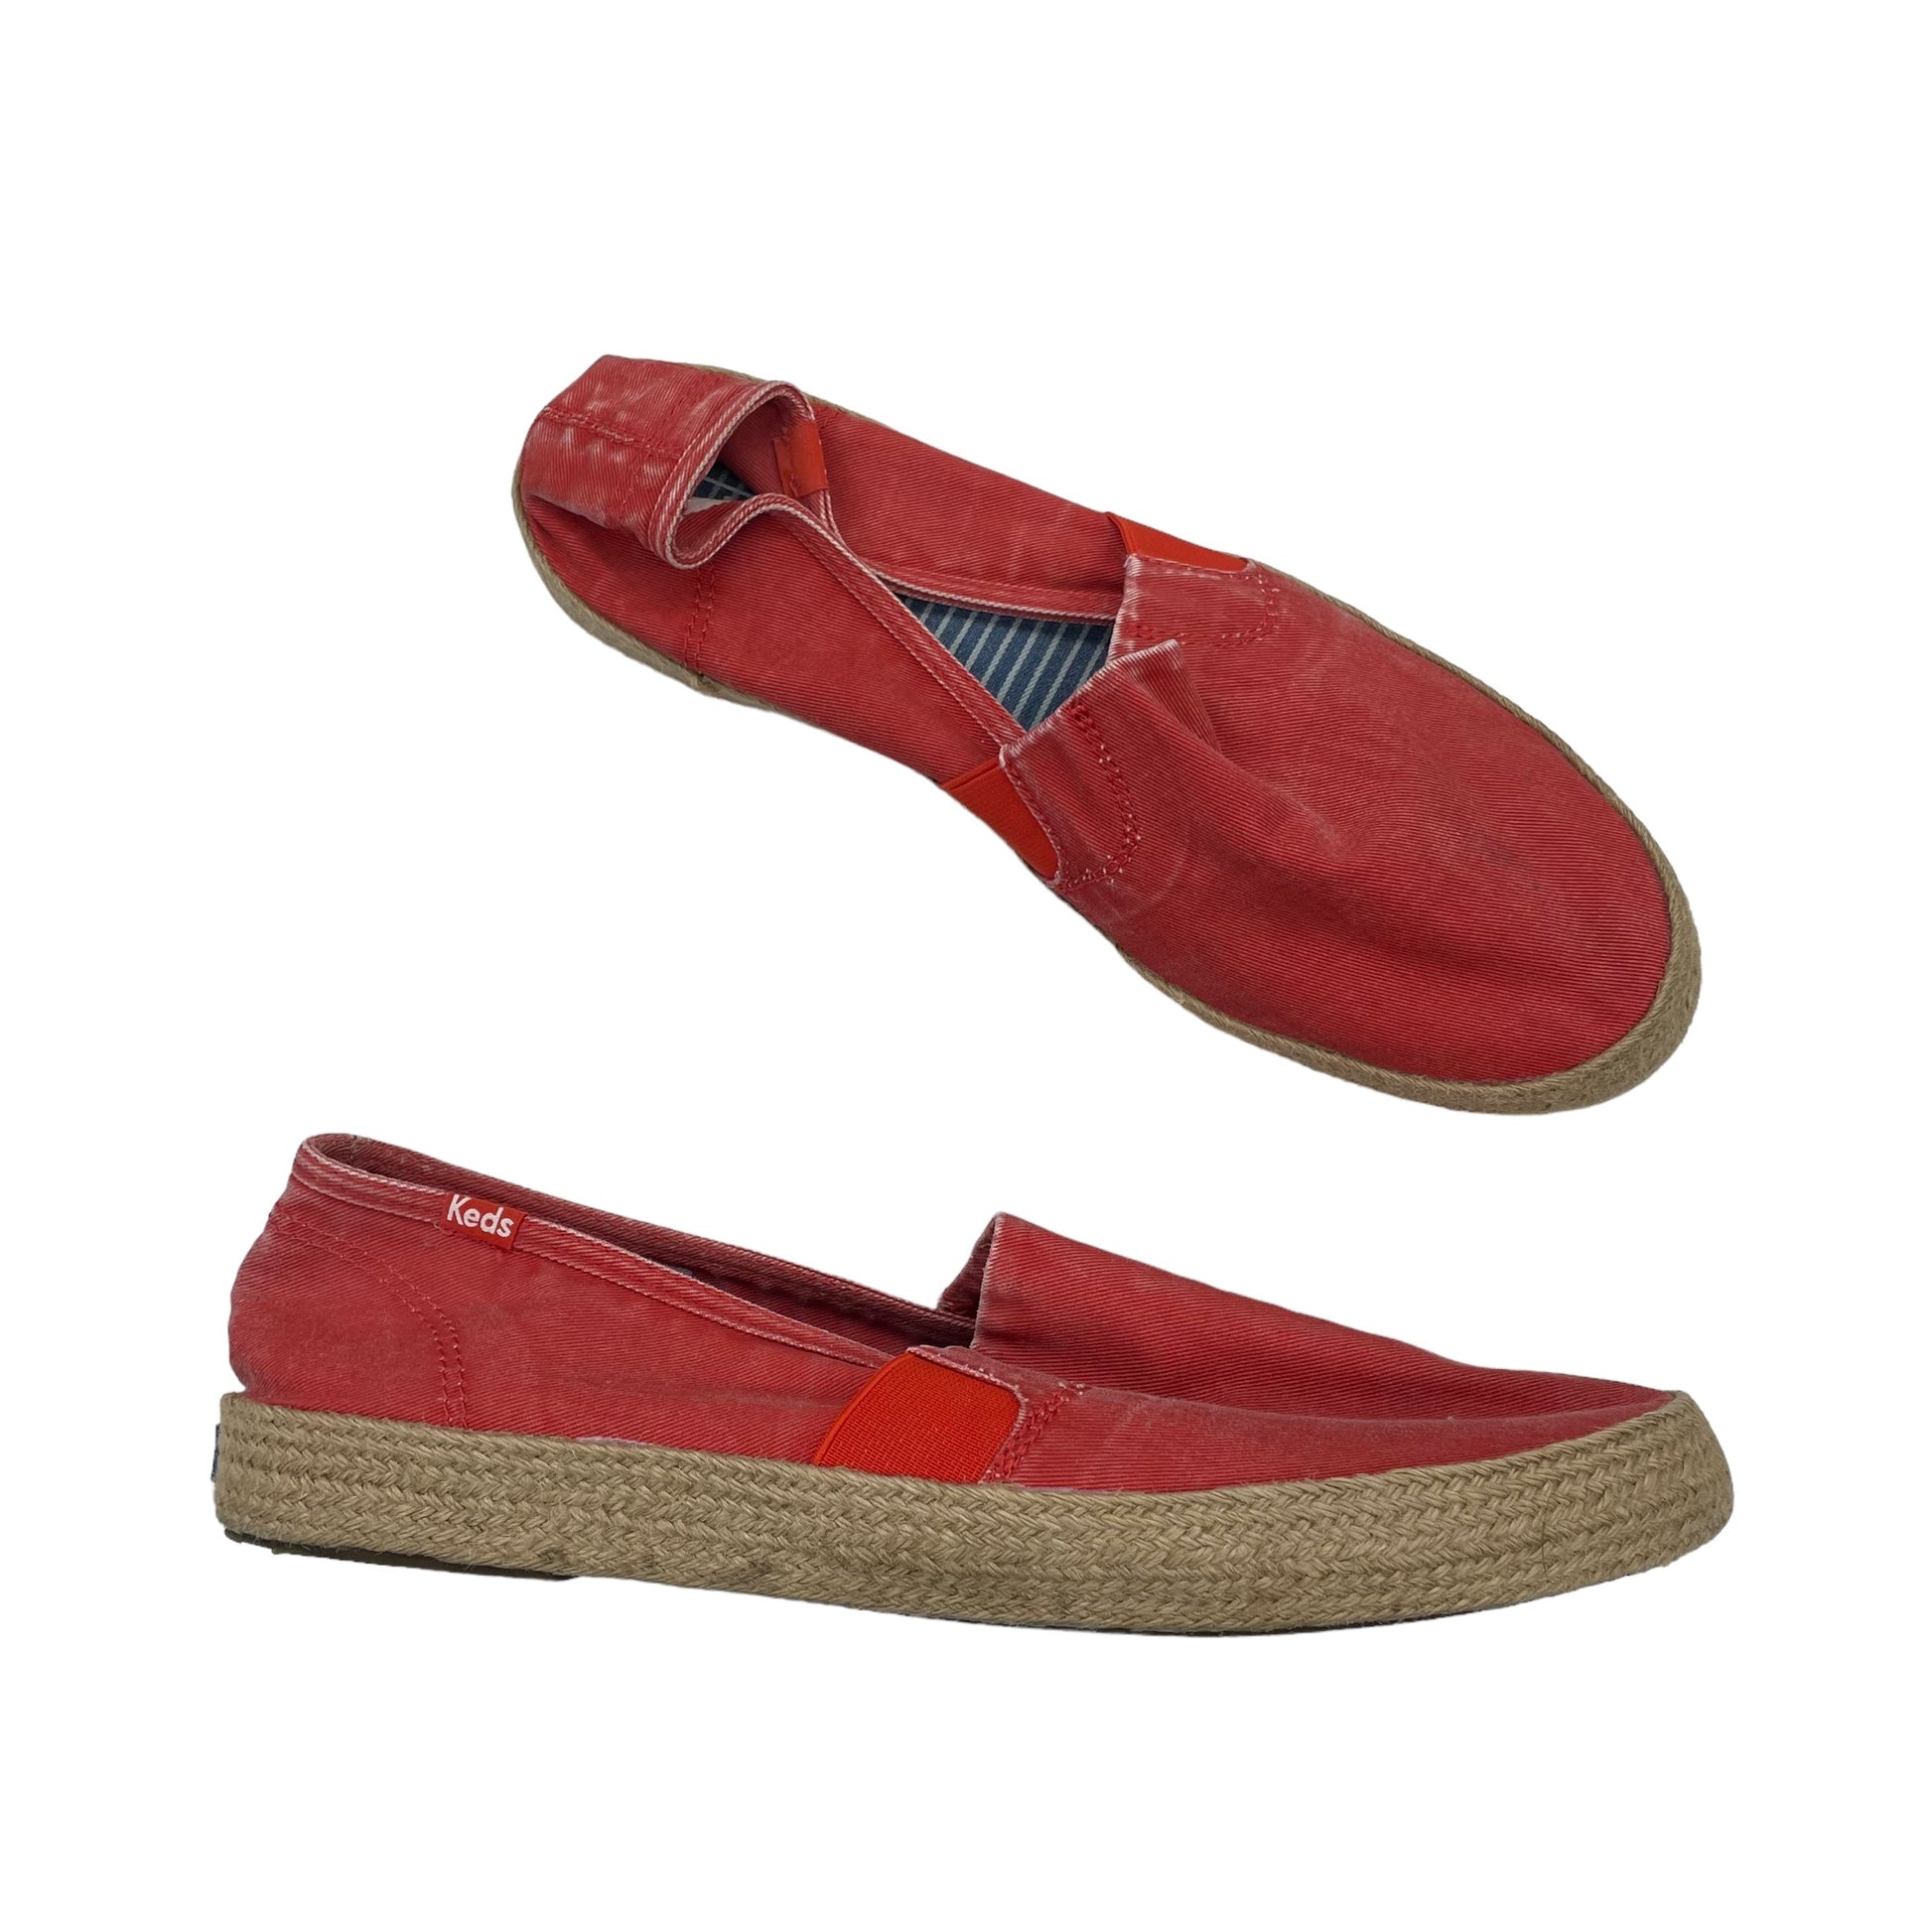 Shoes Flats By Keds Size: 11